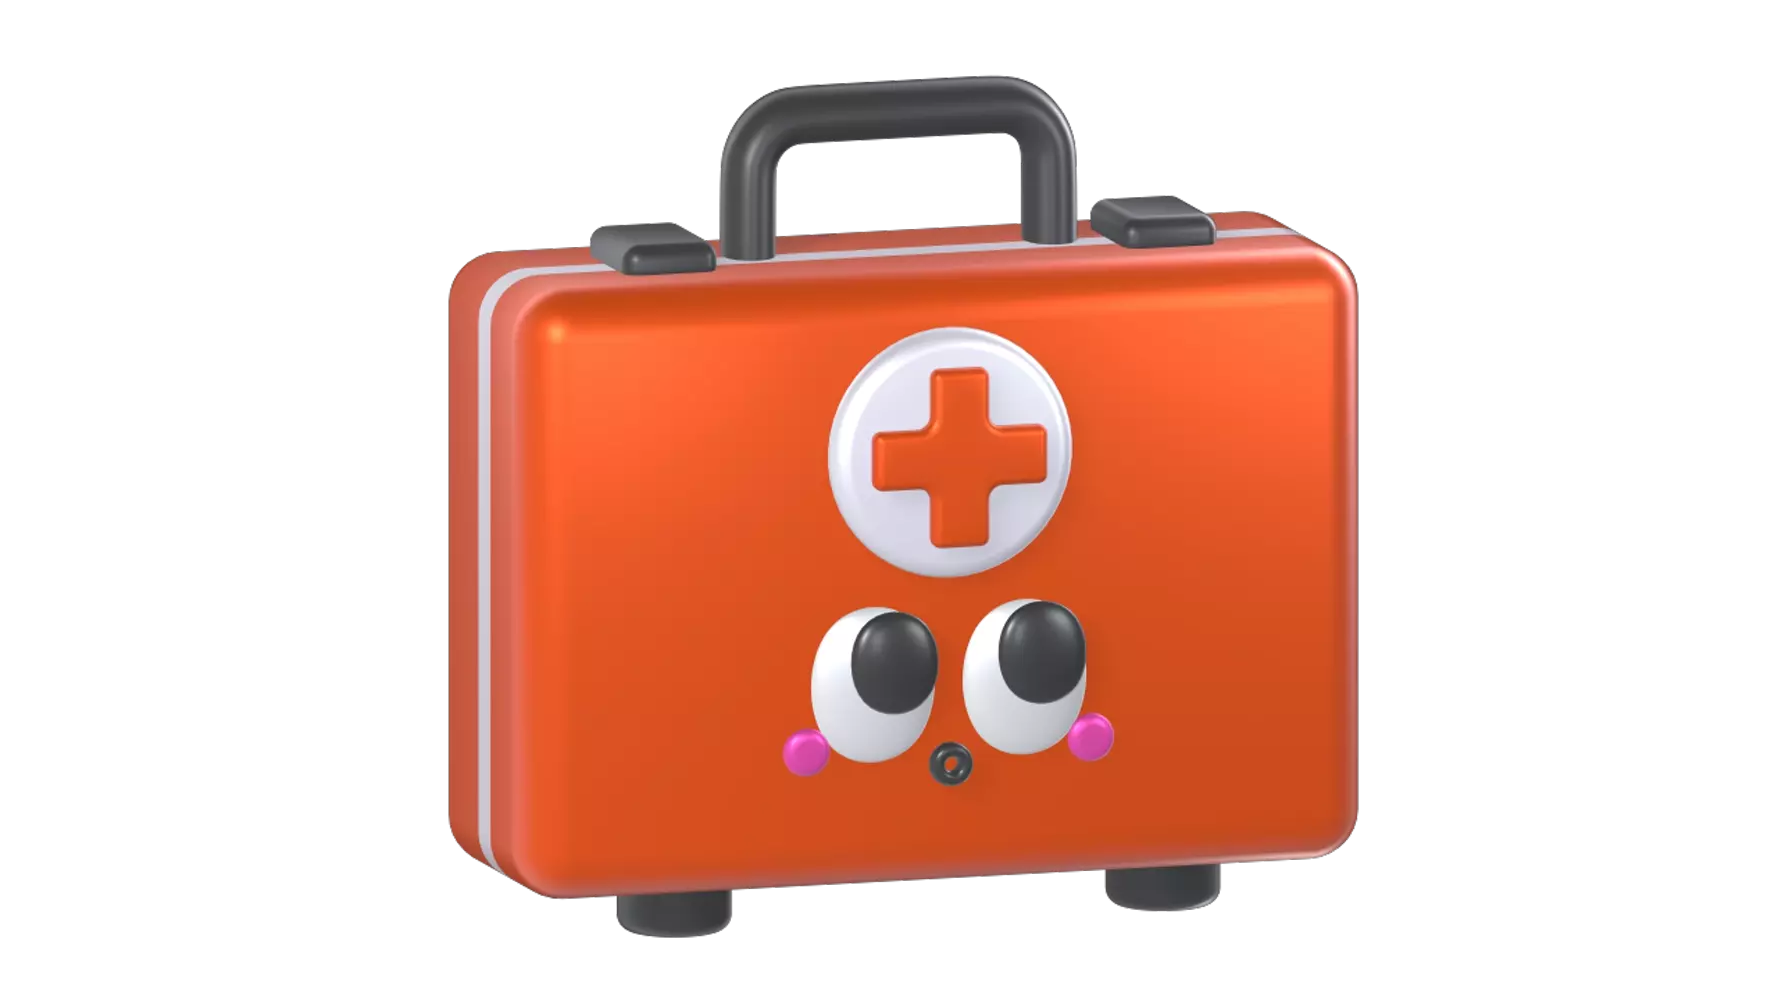 First Aid Kit 3D Graphic